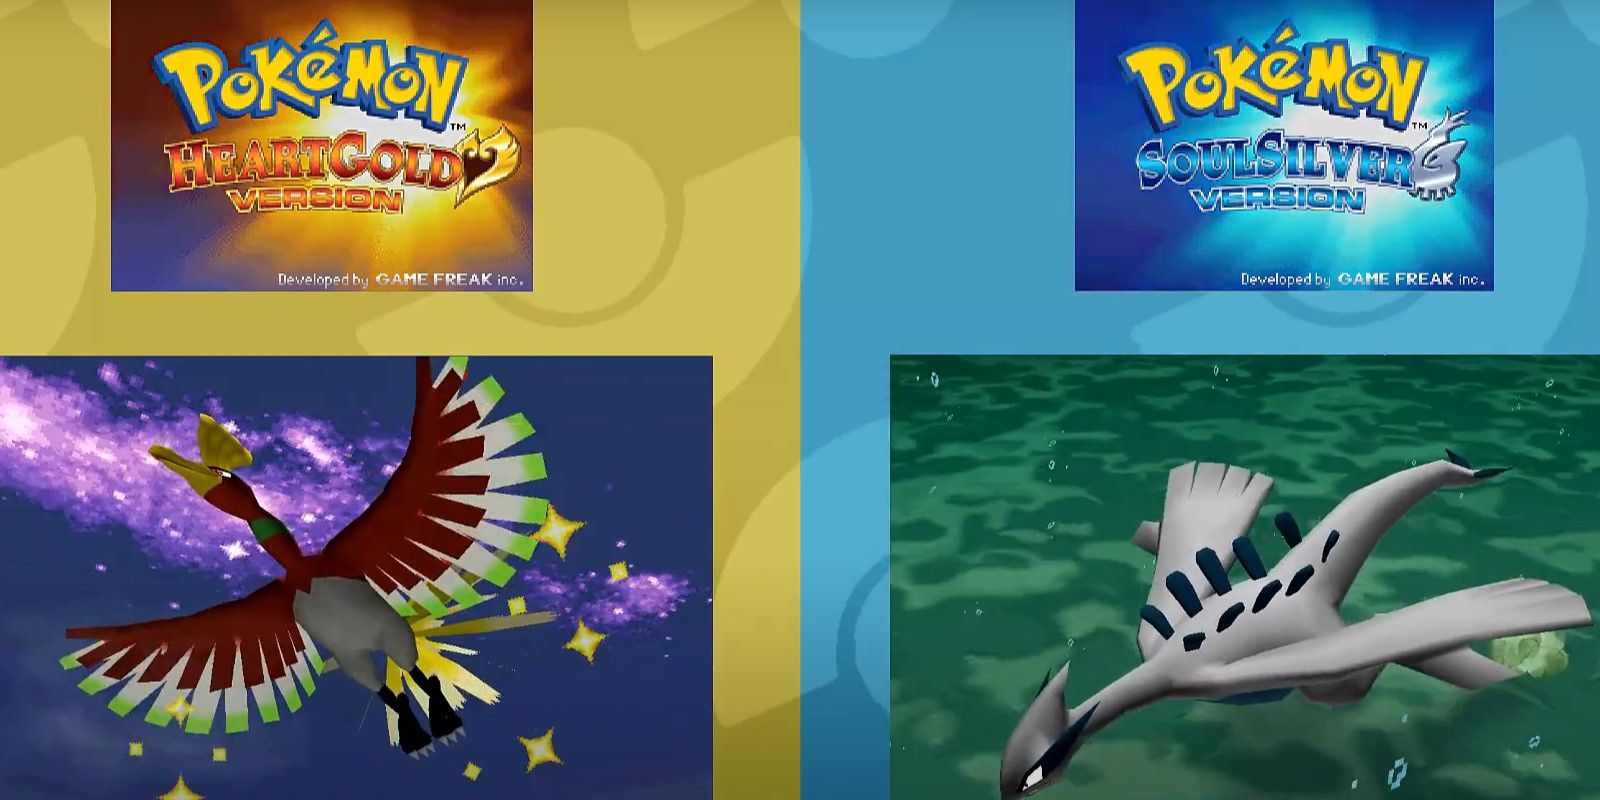 The Pokemon character is showing the HeartGold and SoulSilver game screens.